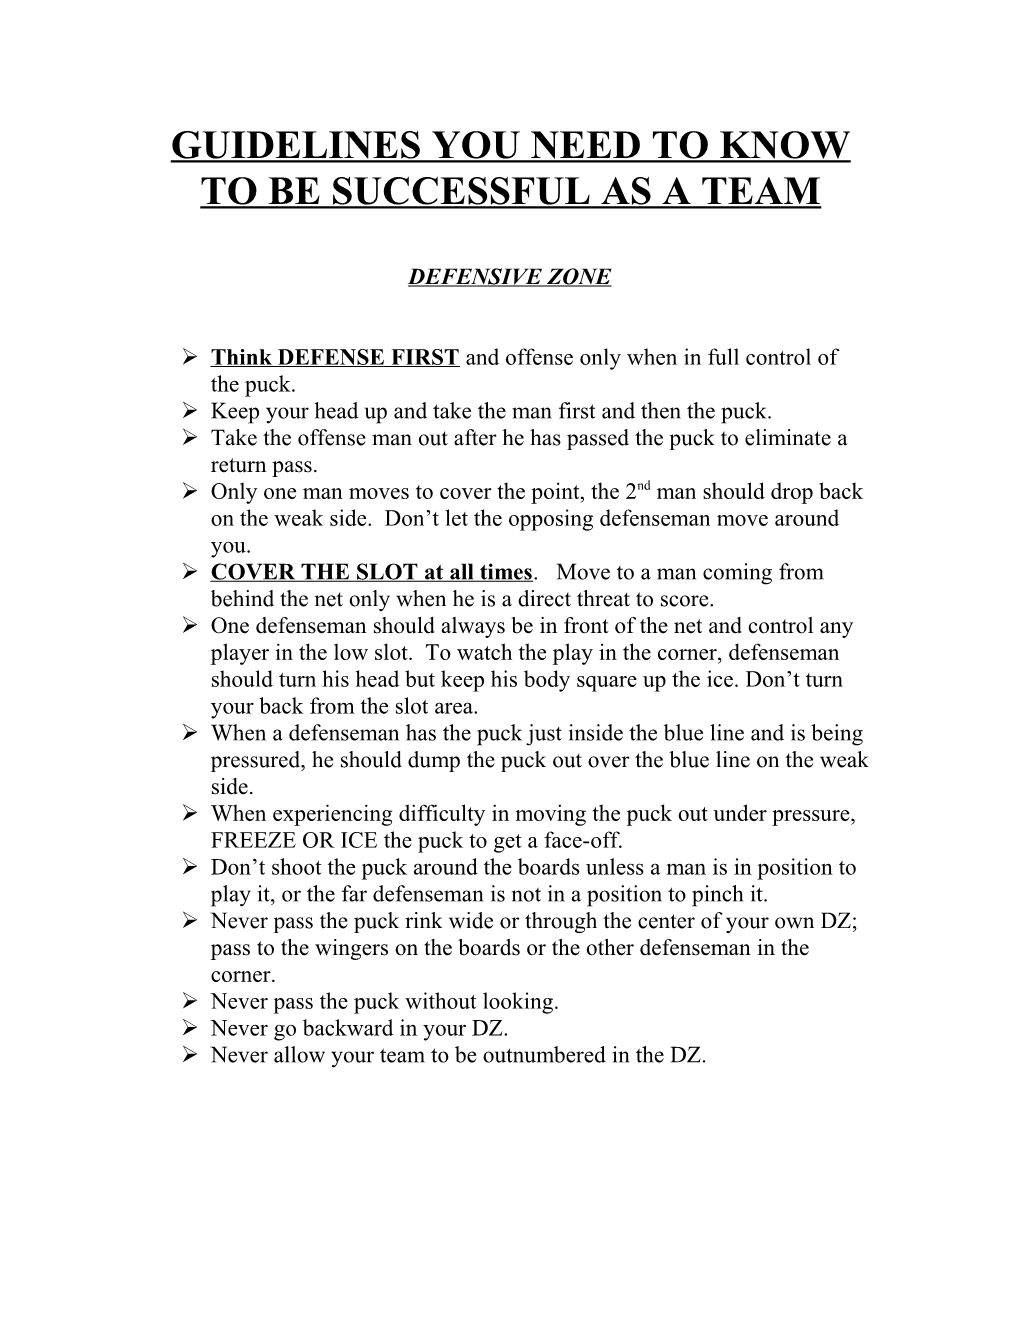 Guidelines You Need to Know to Be Successful As a Team